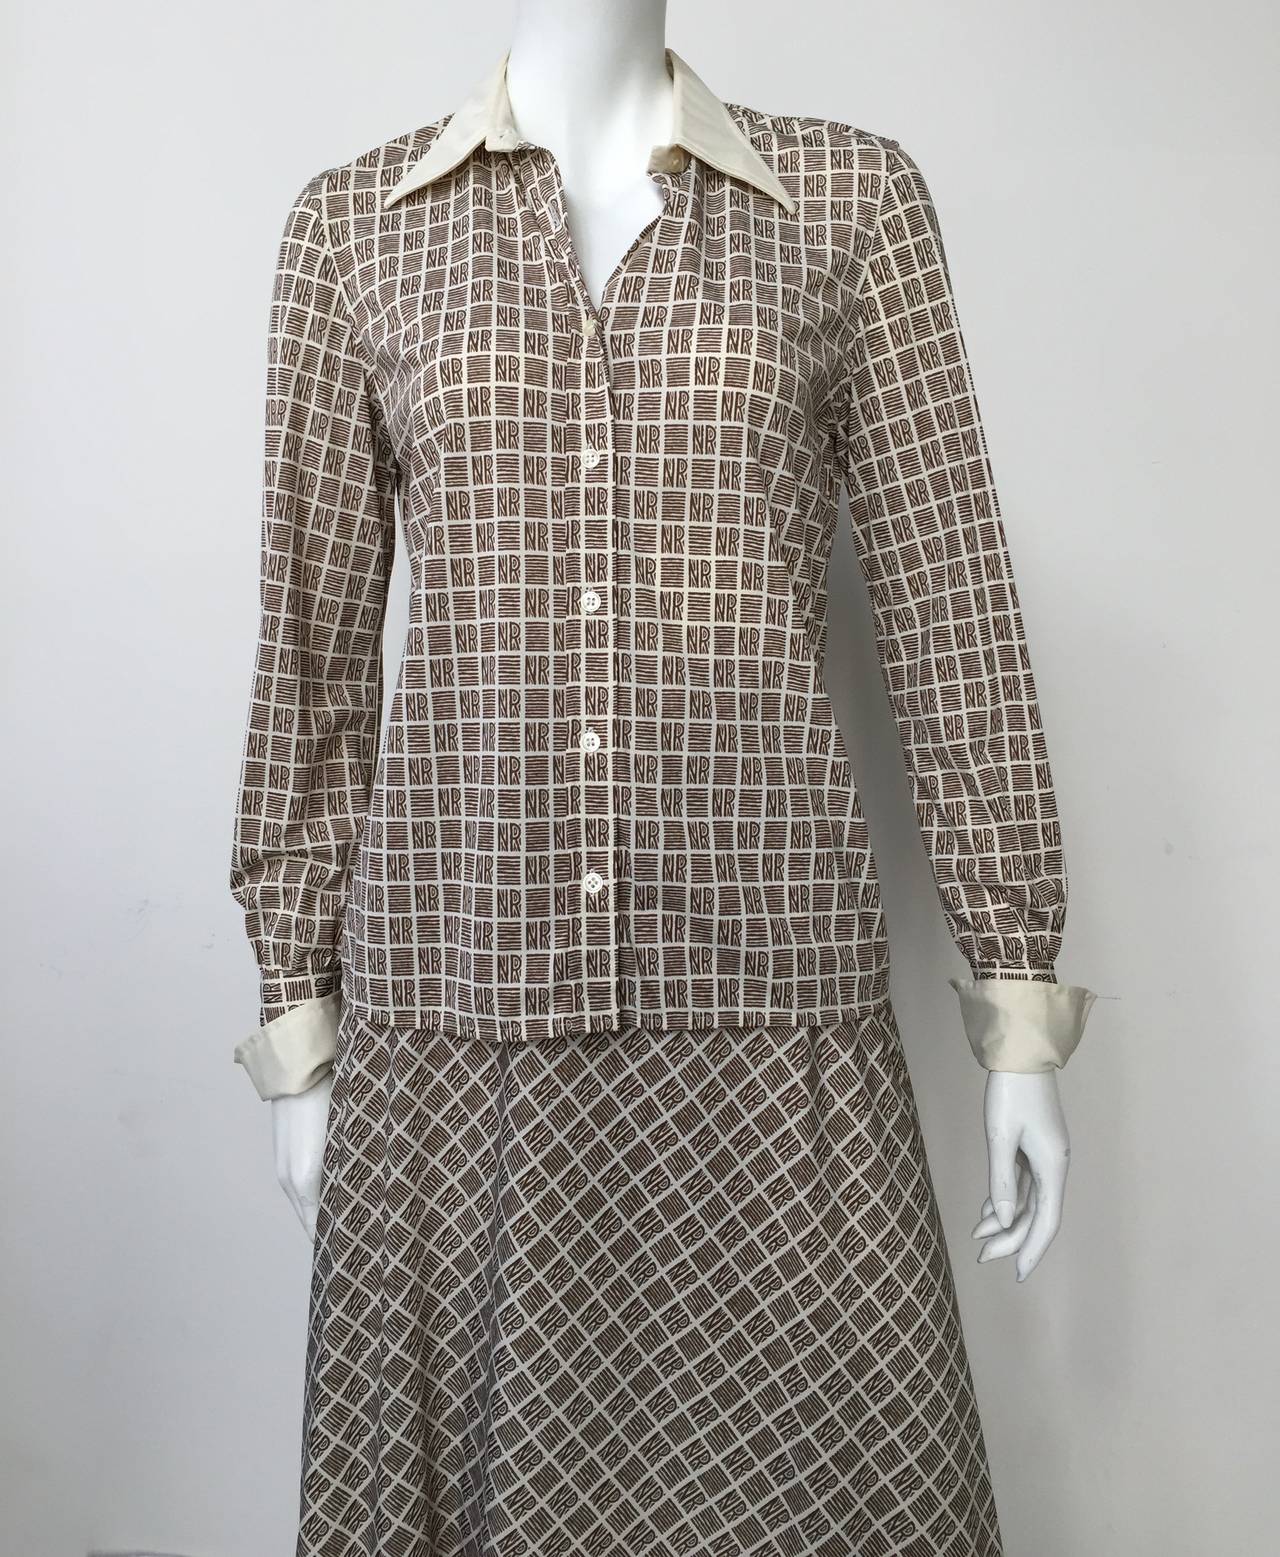 Nina Ricci 1970s Week-End logo 2 piece blouse & skirt set. Ladies please grab your tape measure so you can measure your bust, waist, hips and sleeves to see if this lovely timeless set will fit your body to perfection. 
Size medium made in